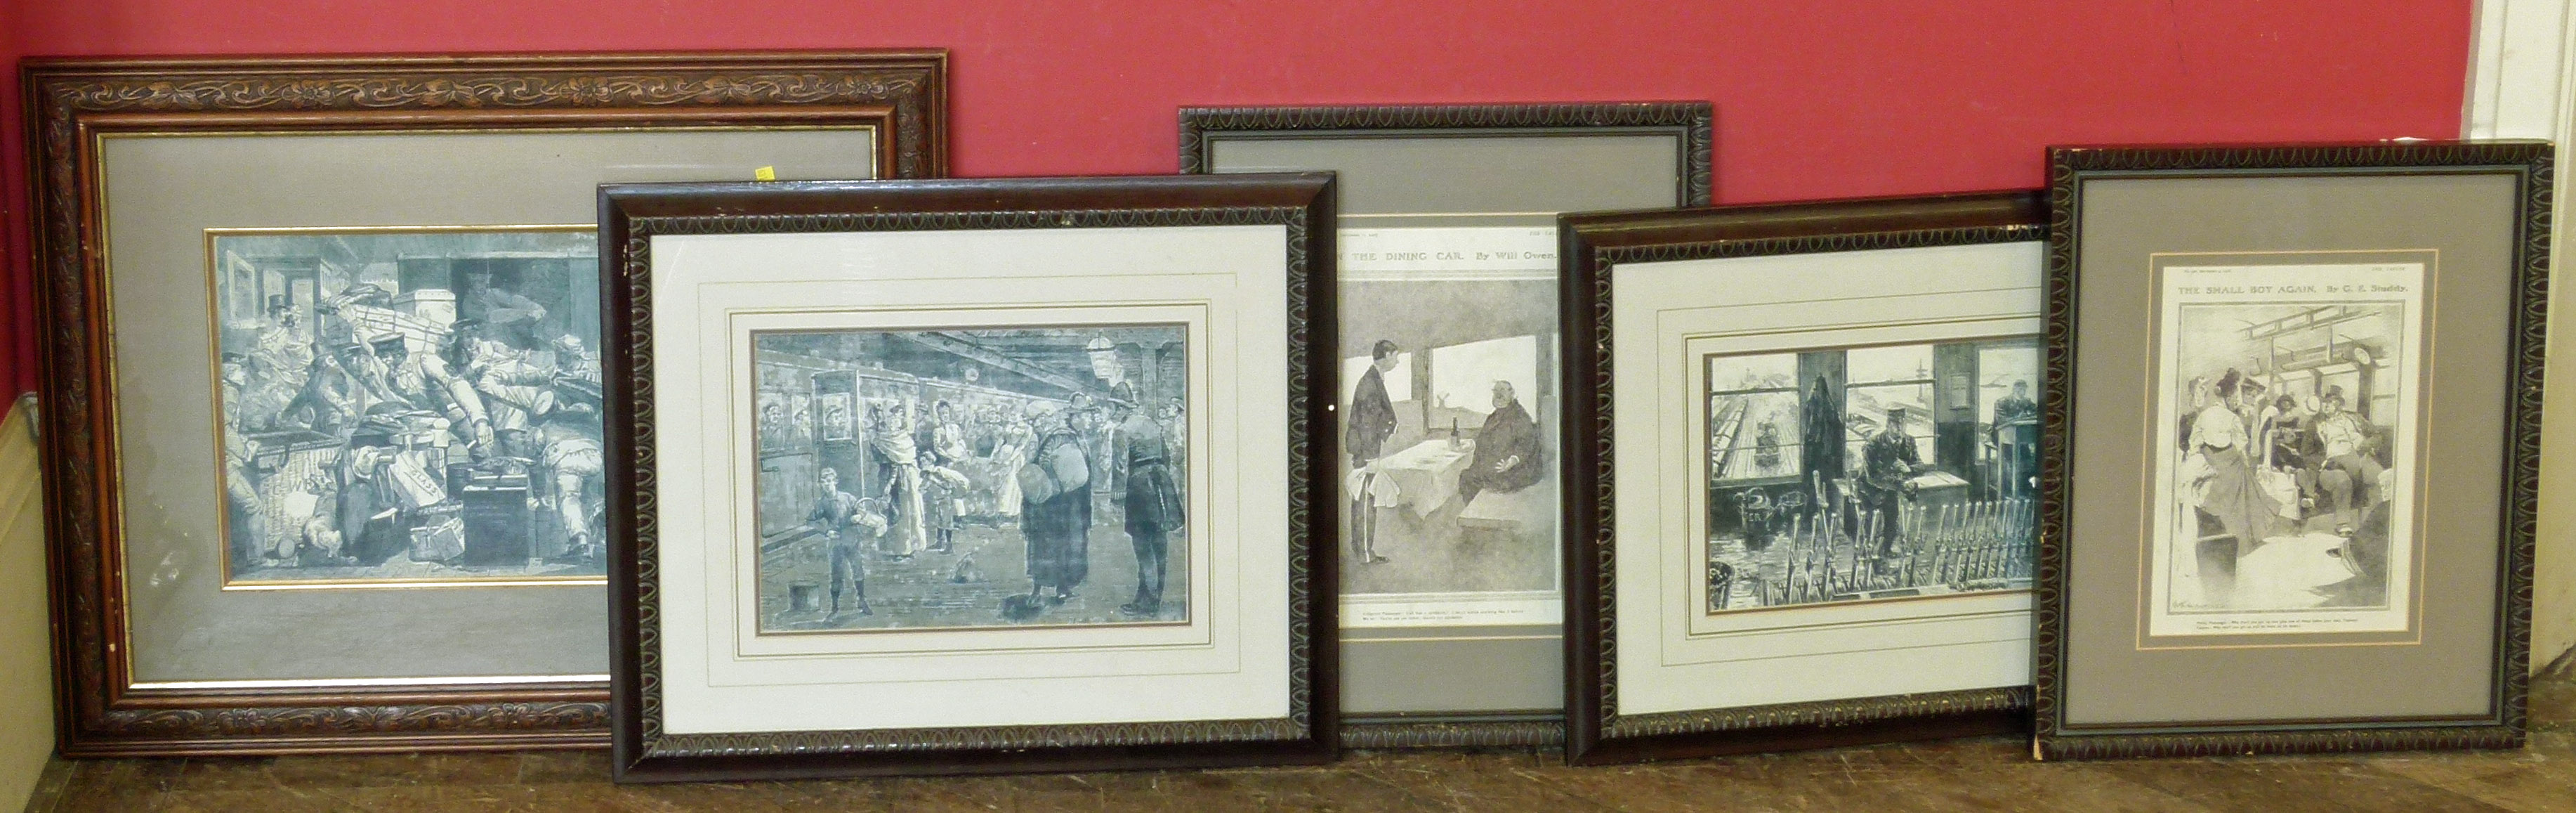 Framed pages copies from the Tatler and illustrated London news Condition reports not available